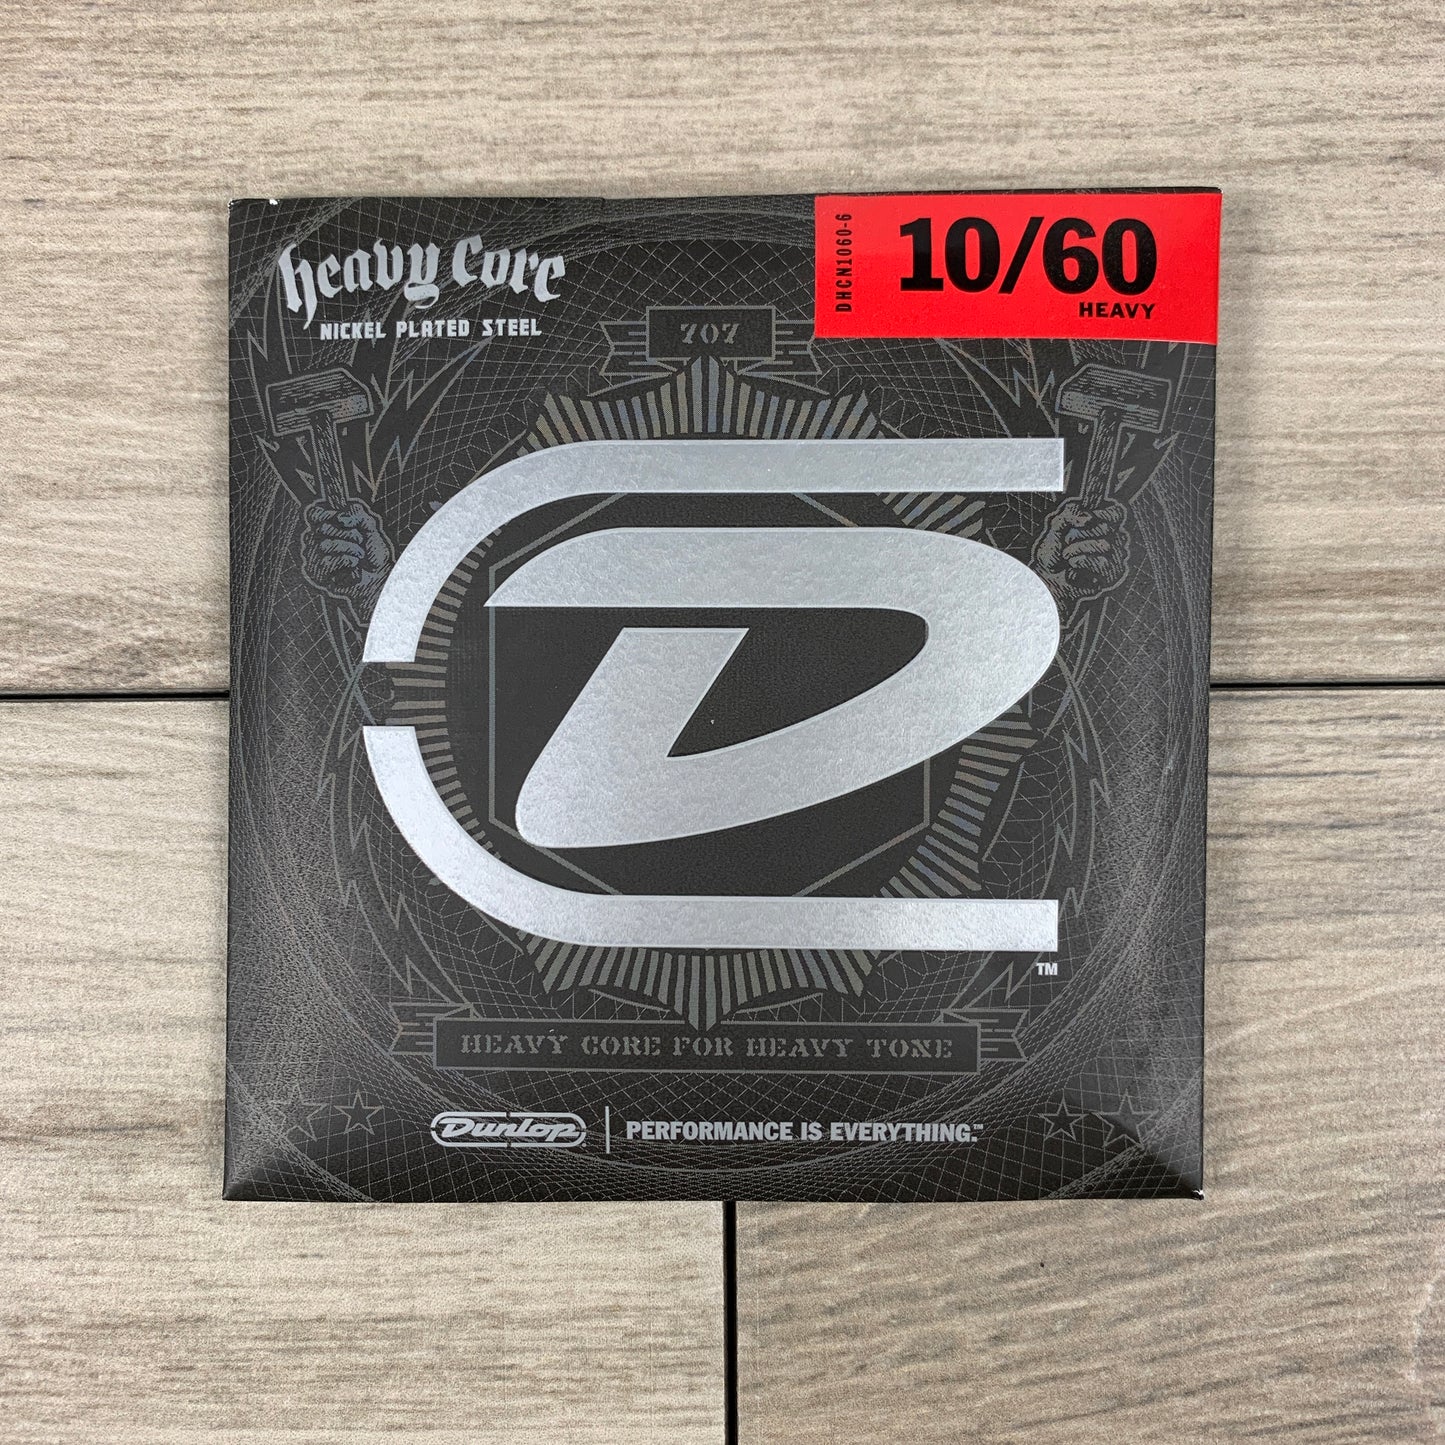 Dunlop Heavy Core Nickel Wound Electric Guitar Strings, 10-60, Heavy